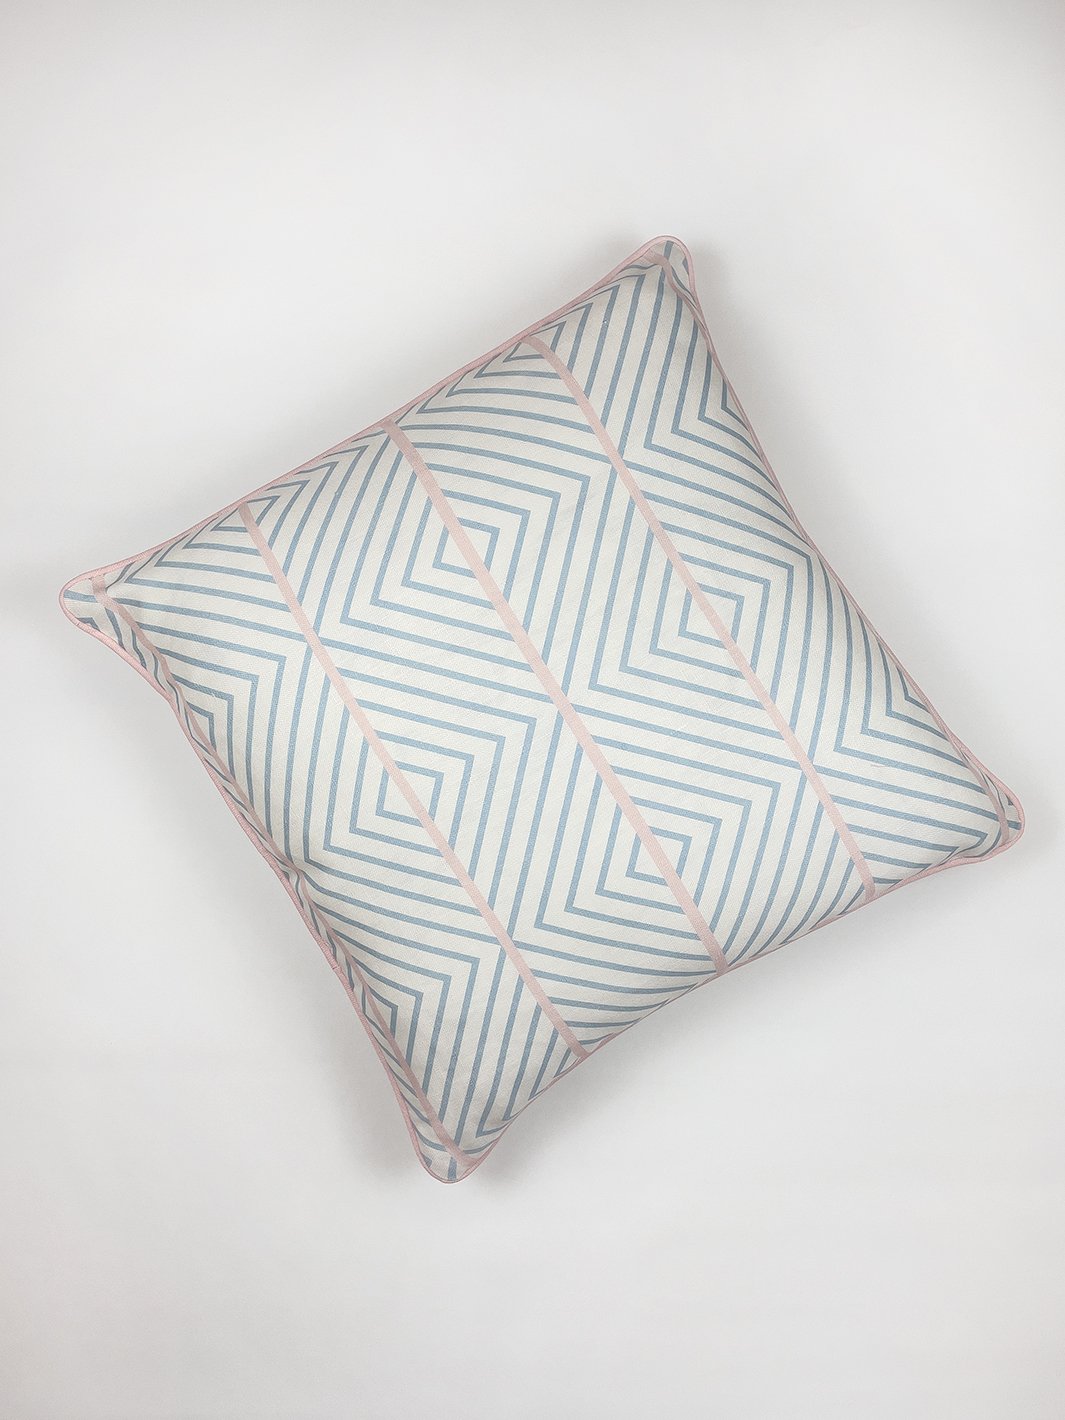 'Barbie™ Dreamhouse Diamond' Throw Pillow - Baby Blue and Pink